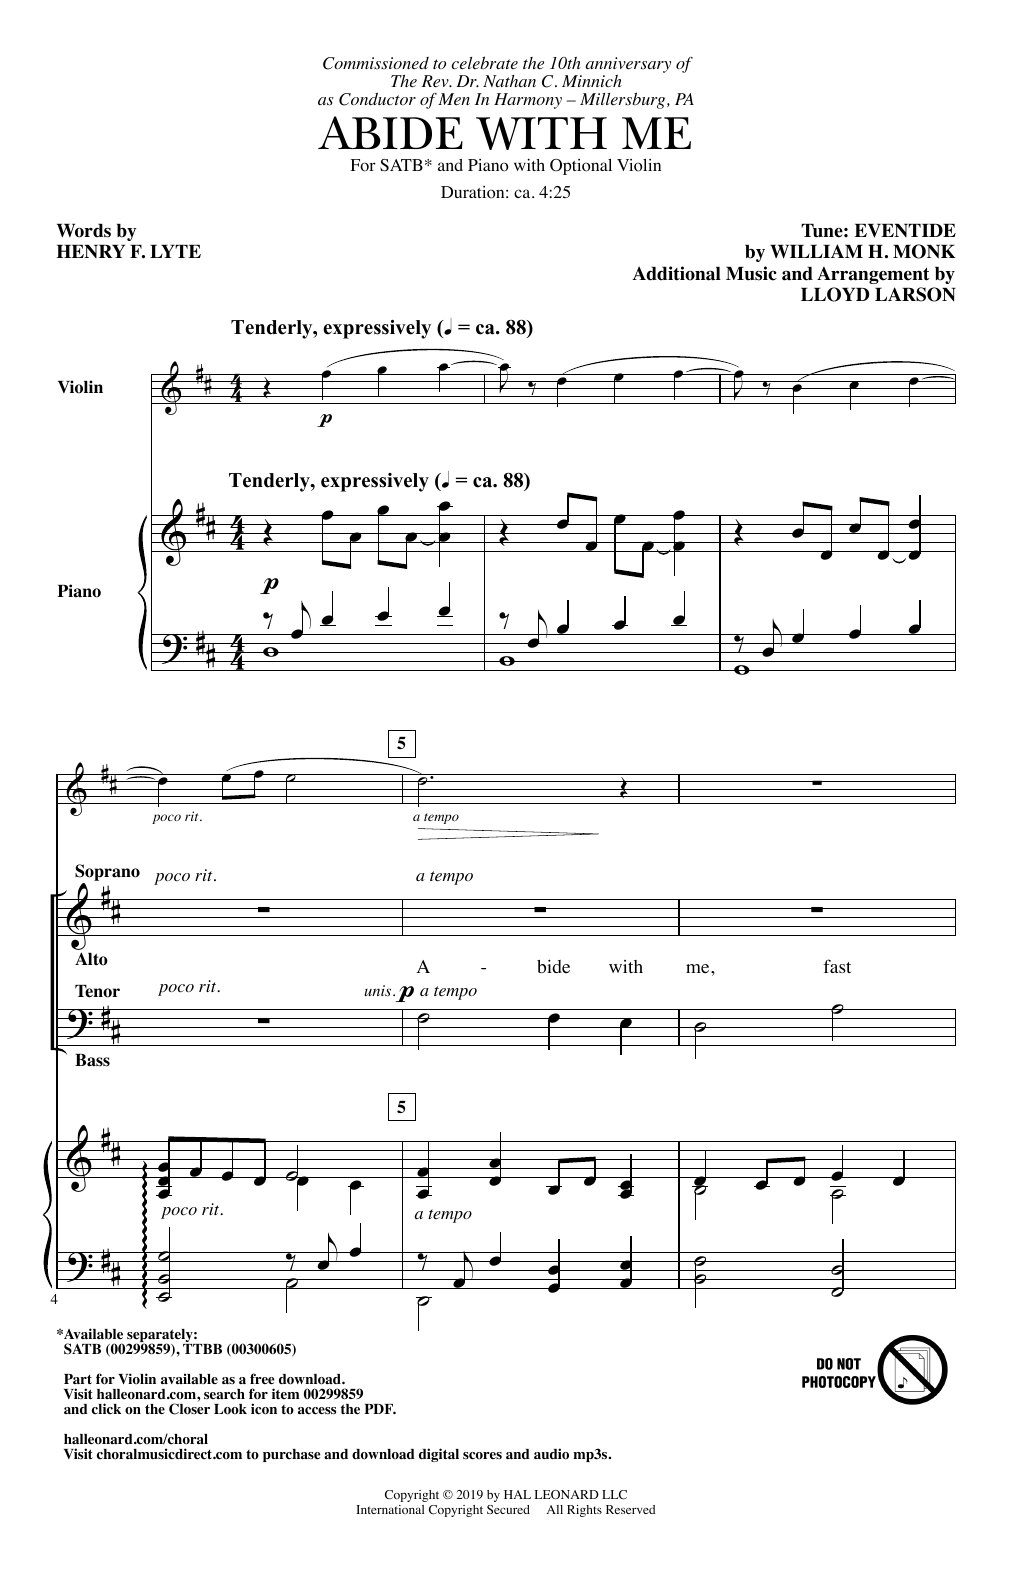 Download Henry F. Lyte Abide With Me (arr. Lloyd Larson) Sheet Music